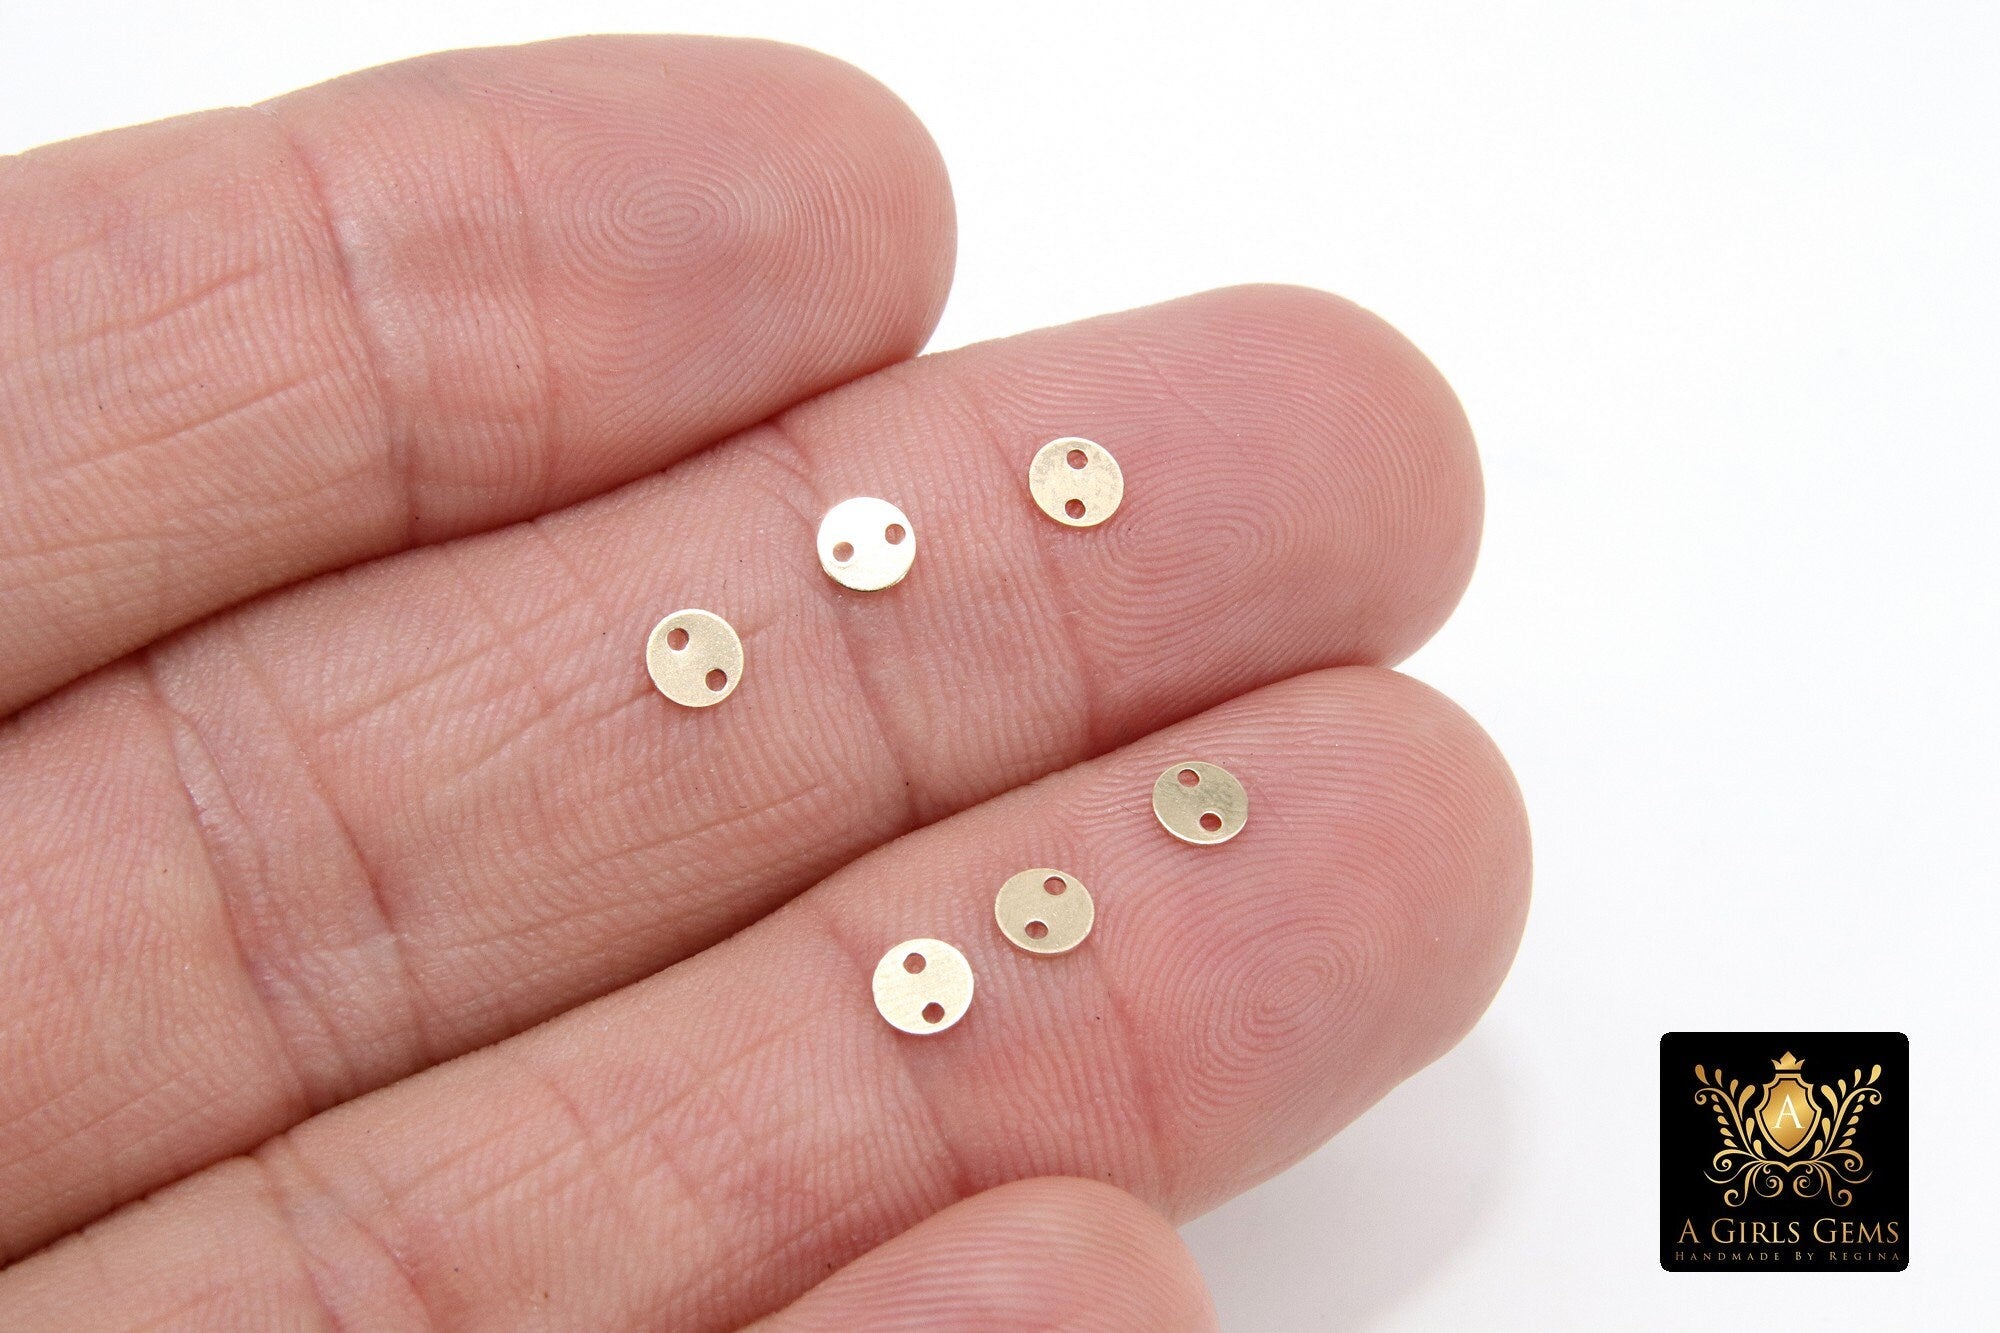 14 K Gold Filled 4 mm Round Disc Connectors, 10 Pc Tiny Flat Gold Blanks #2245, Minimalist 14 20 Jewelry